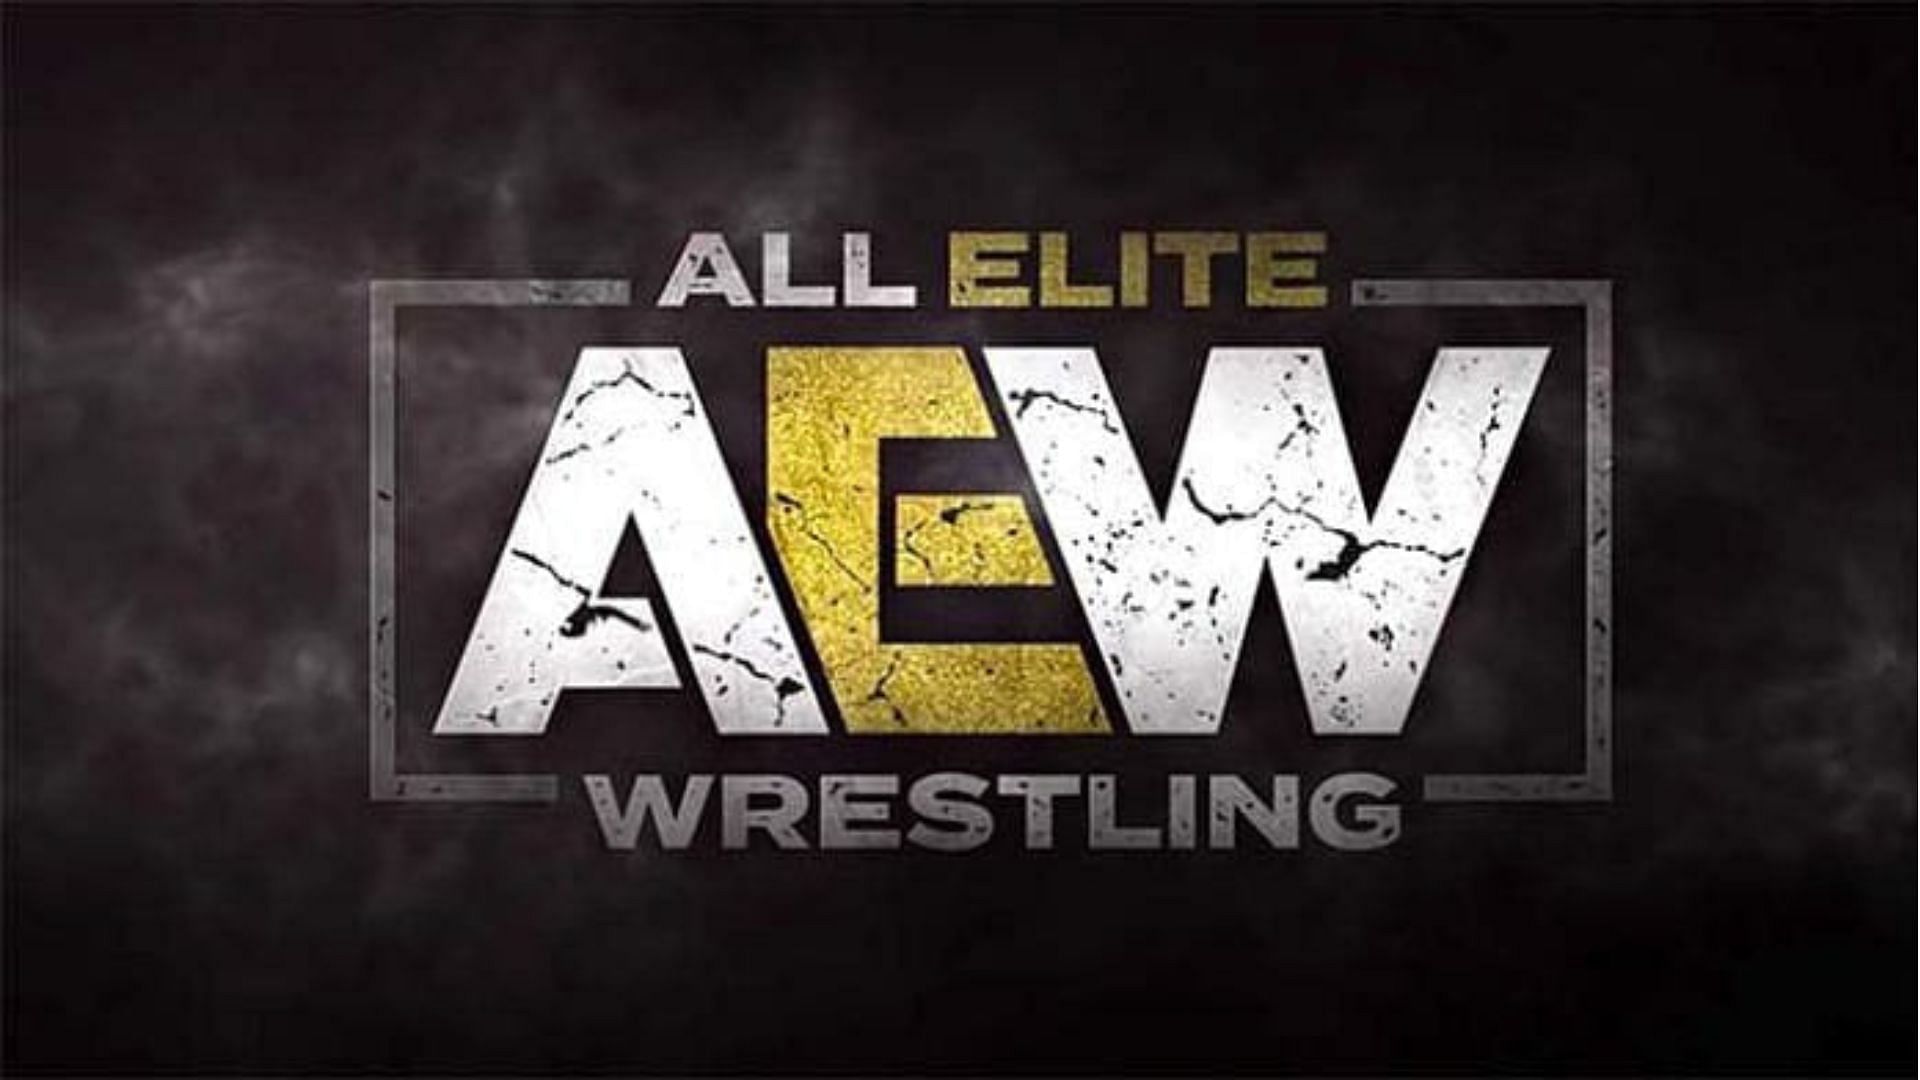 Find out which AEW star is expected to return soon?